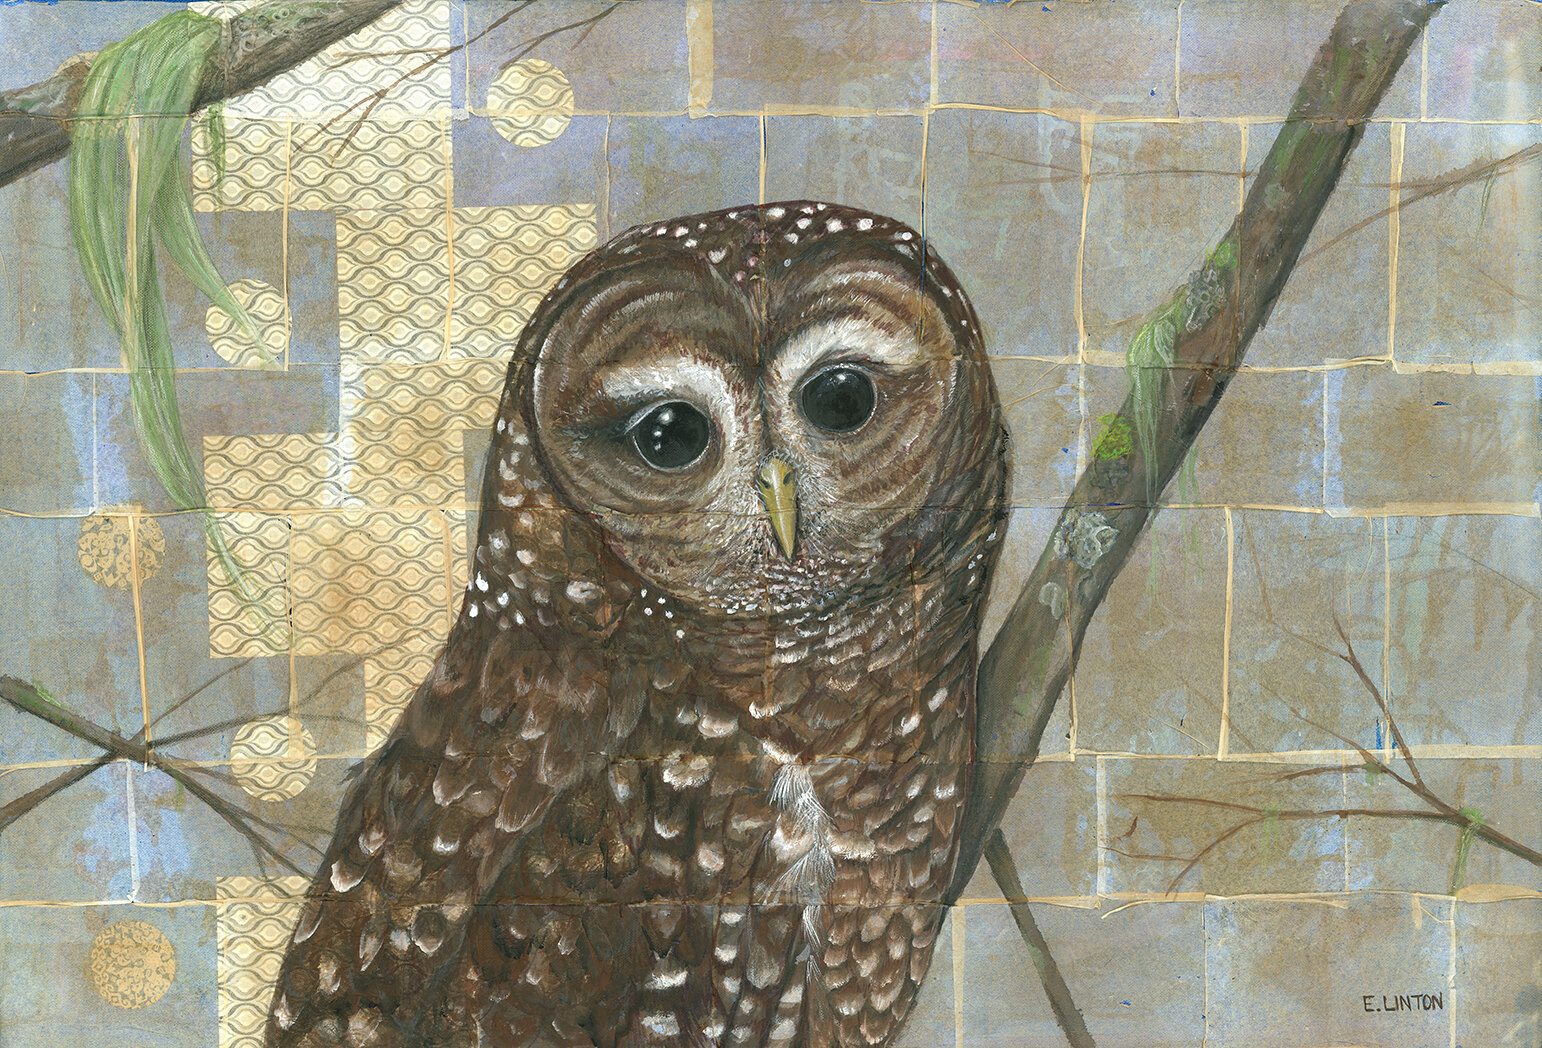 Spotted Owl 